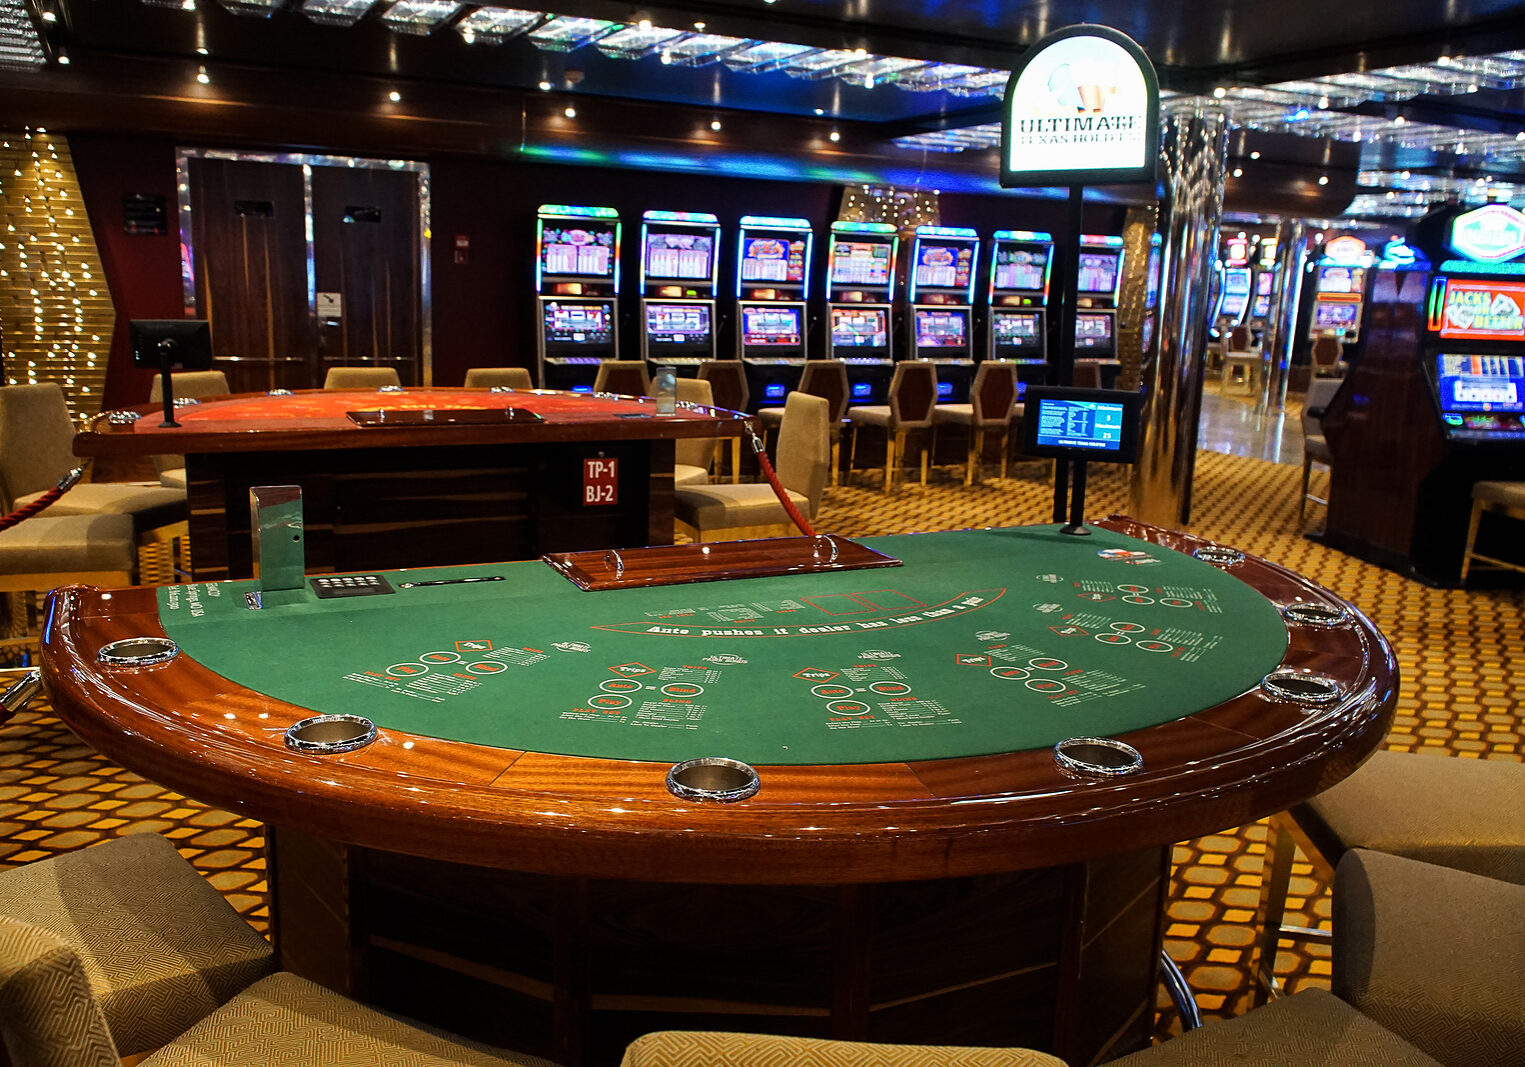 Barcelona, Spain, July 11, 2016 : Casino interior room with blackjack Table and slot machines on a cruise boat. Gambling entertainment concept.